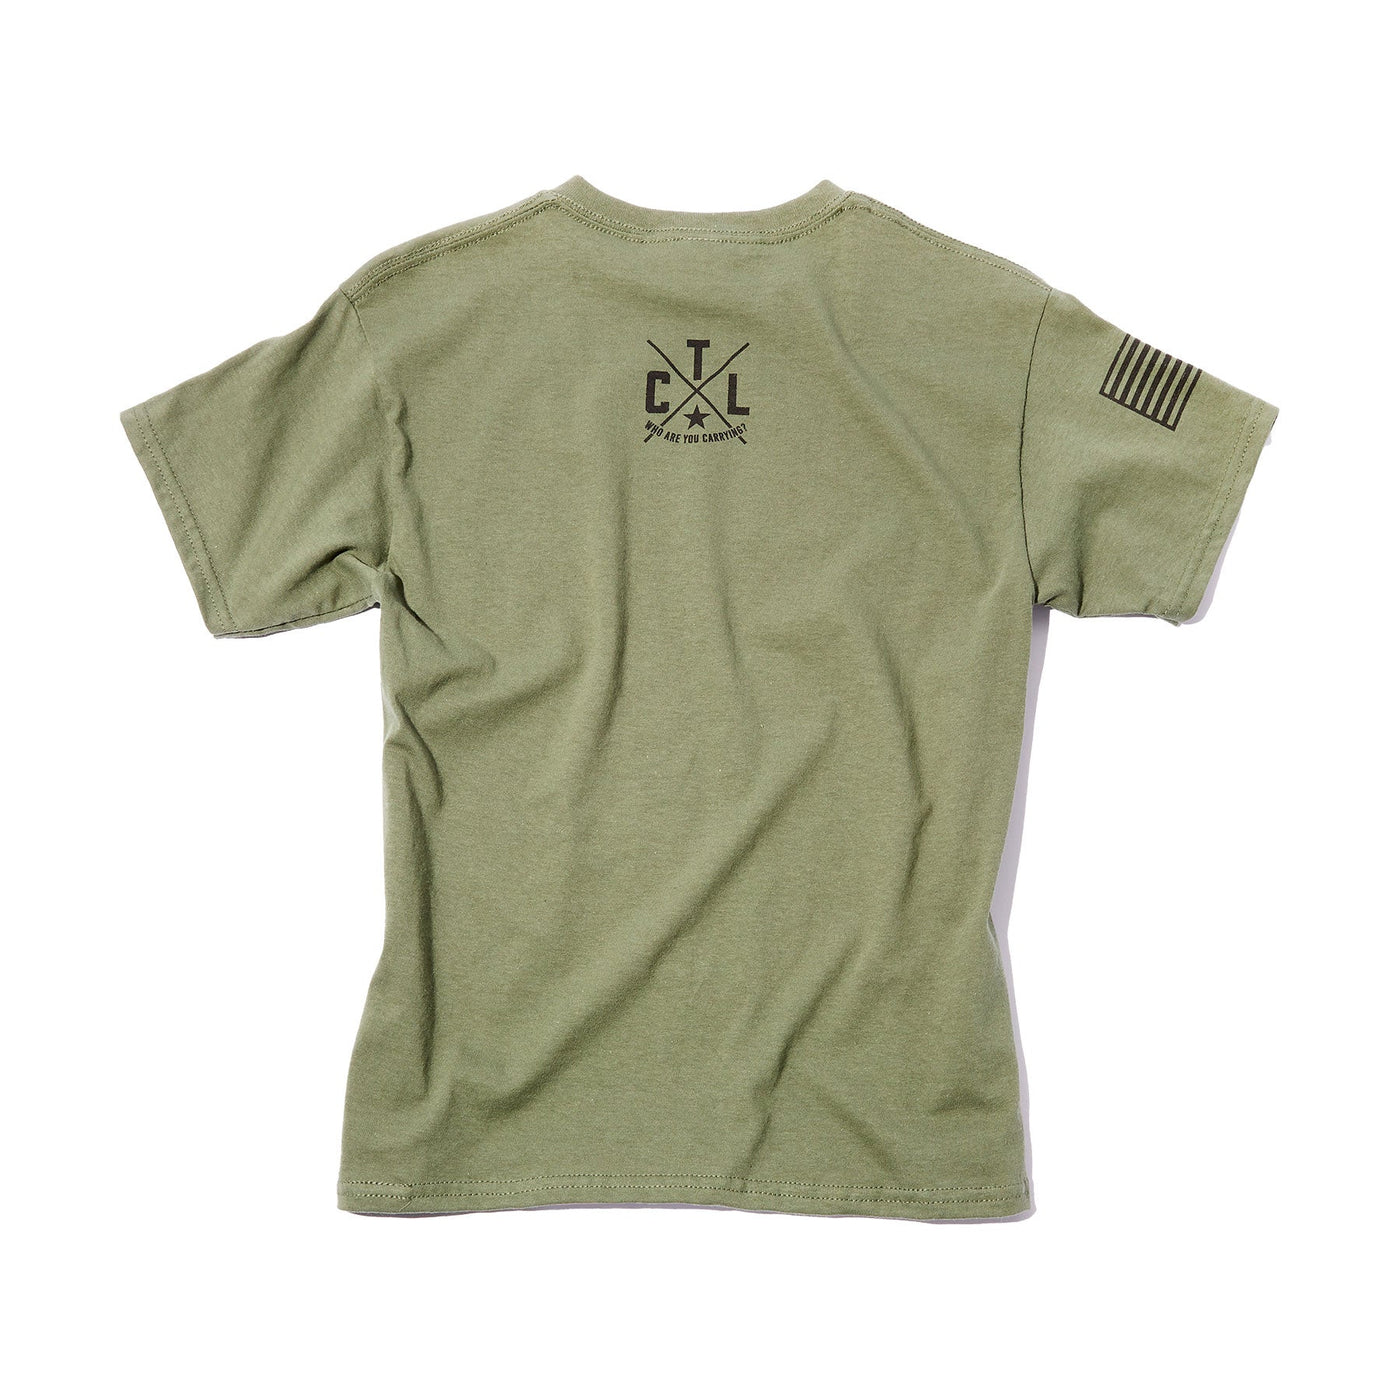 Military Green CTL T-Shirt - Carry The Load Shop